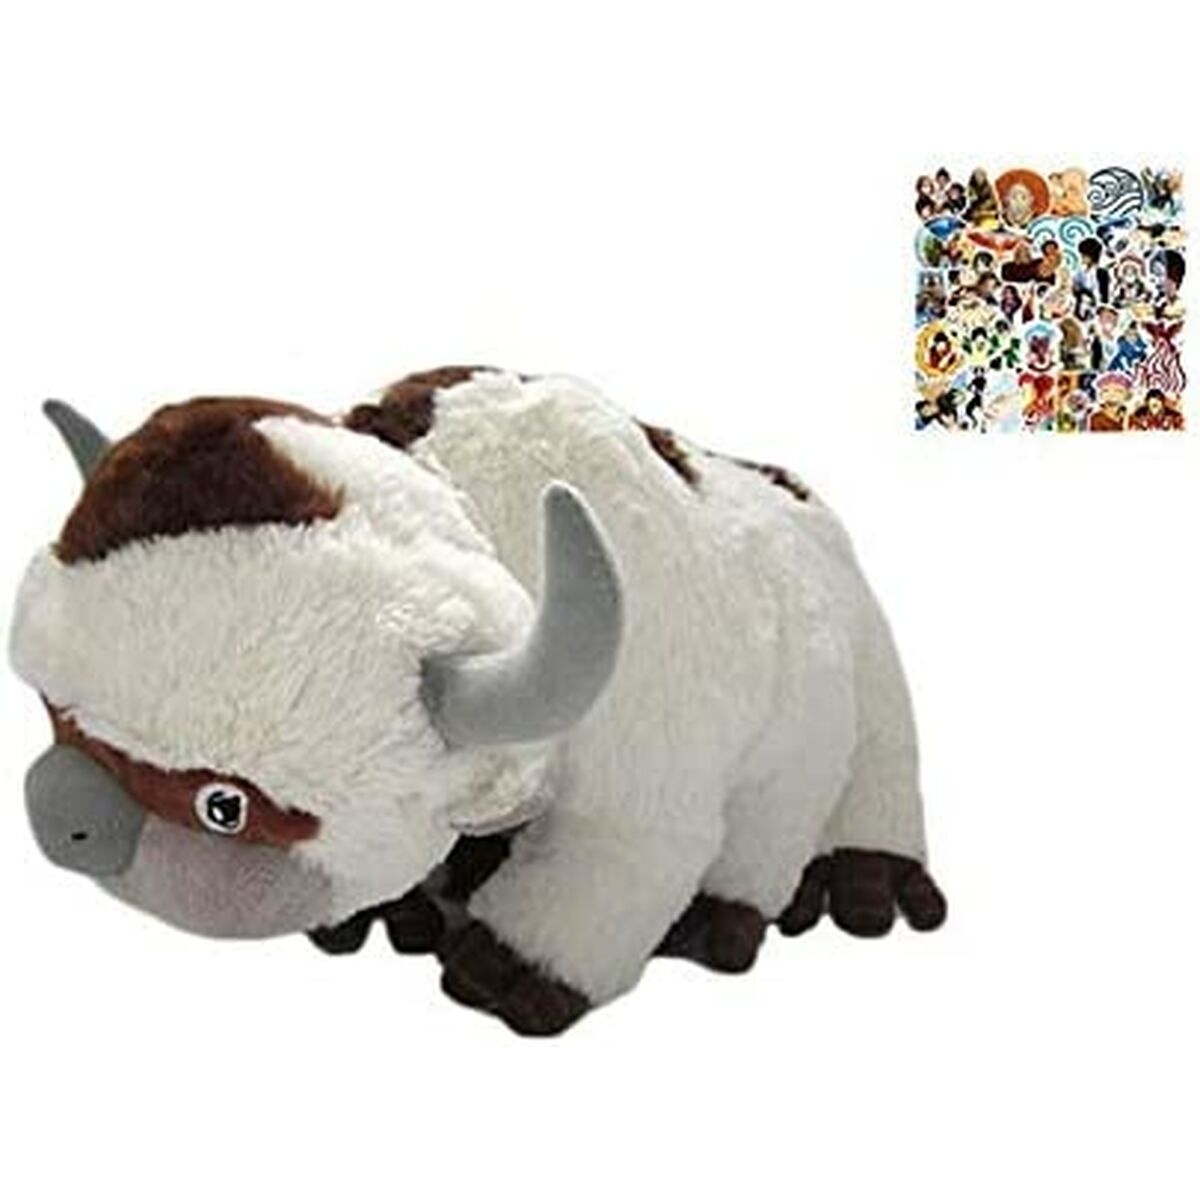 Fluffy toy QWERT310360 White (Refurbished A)